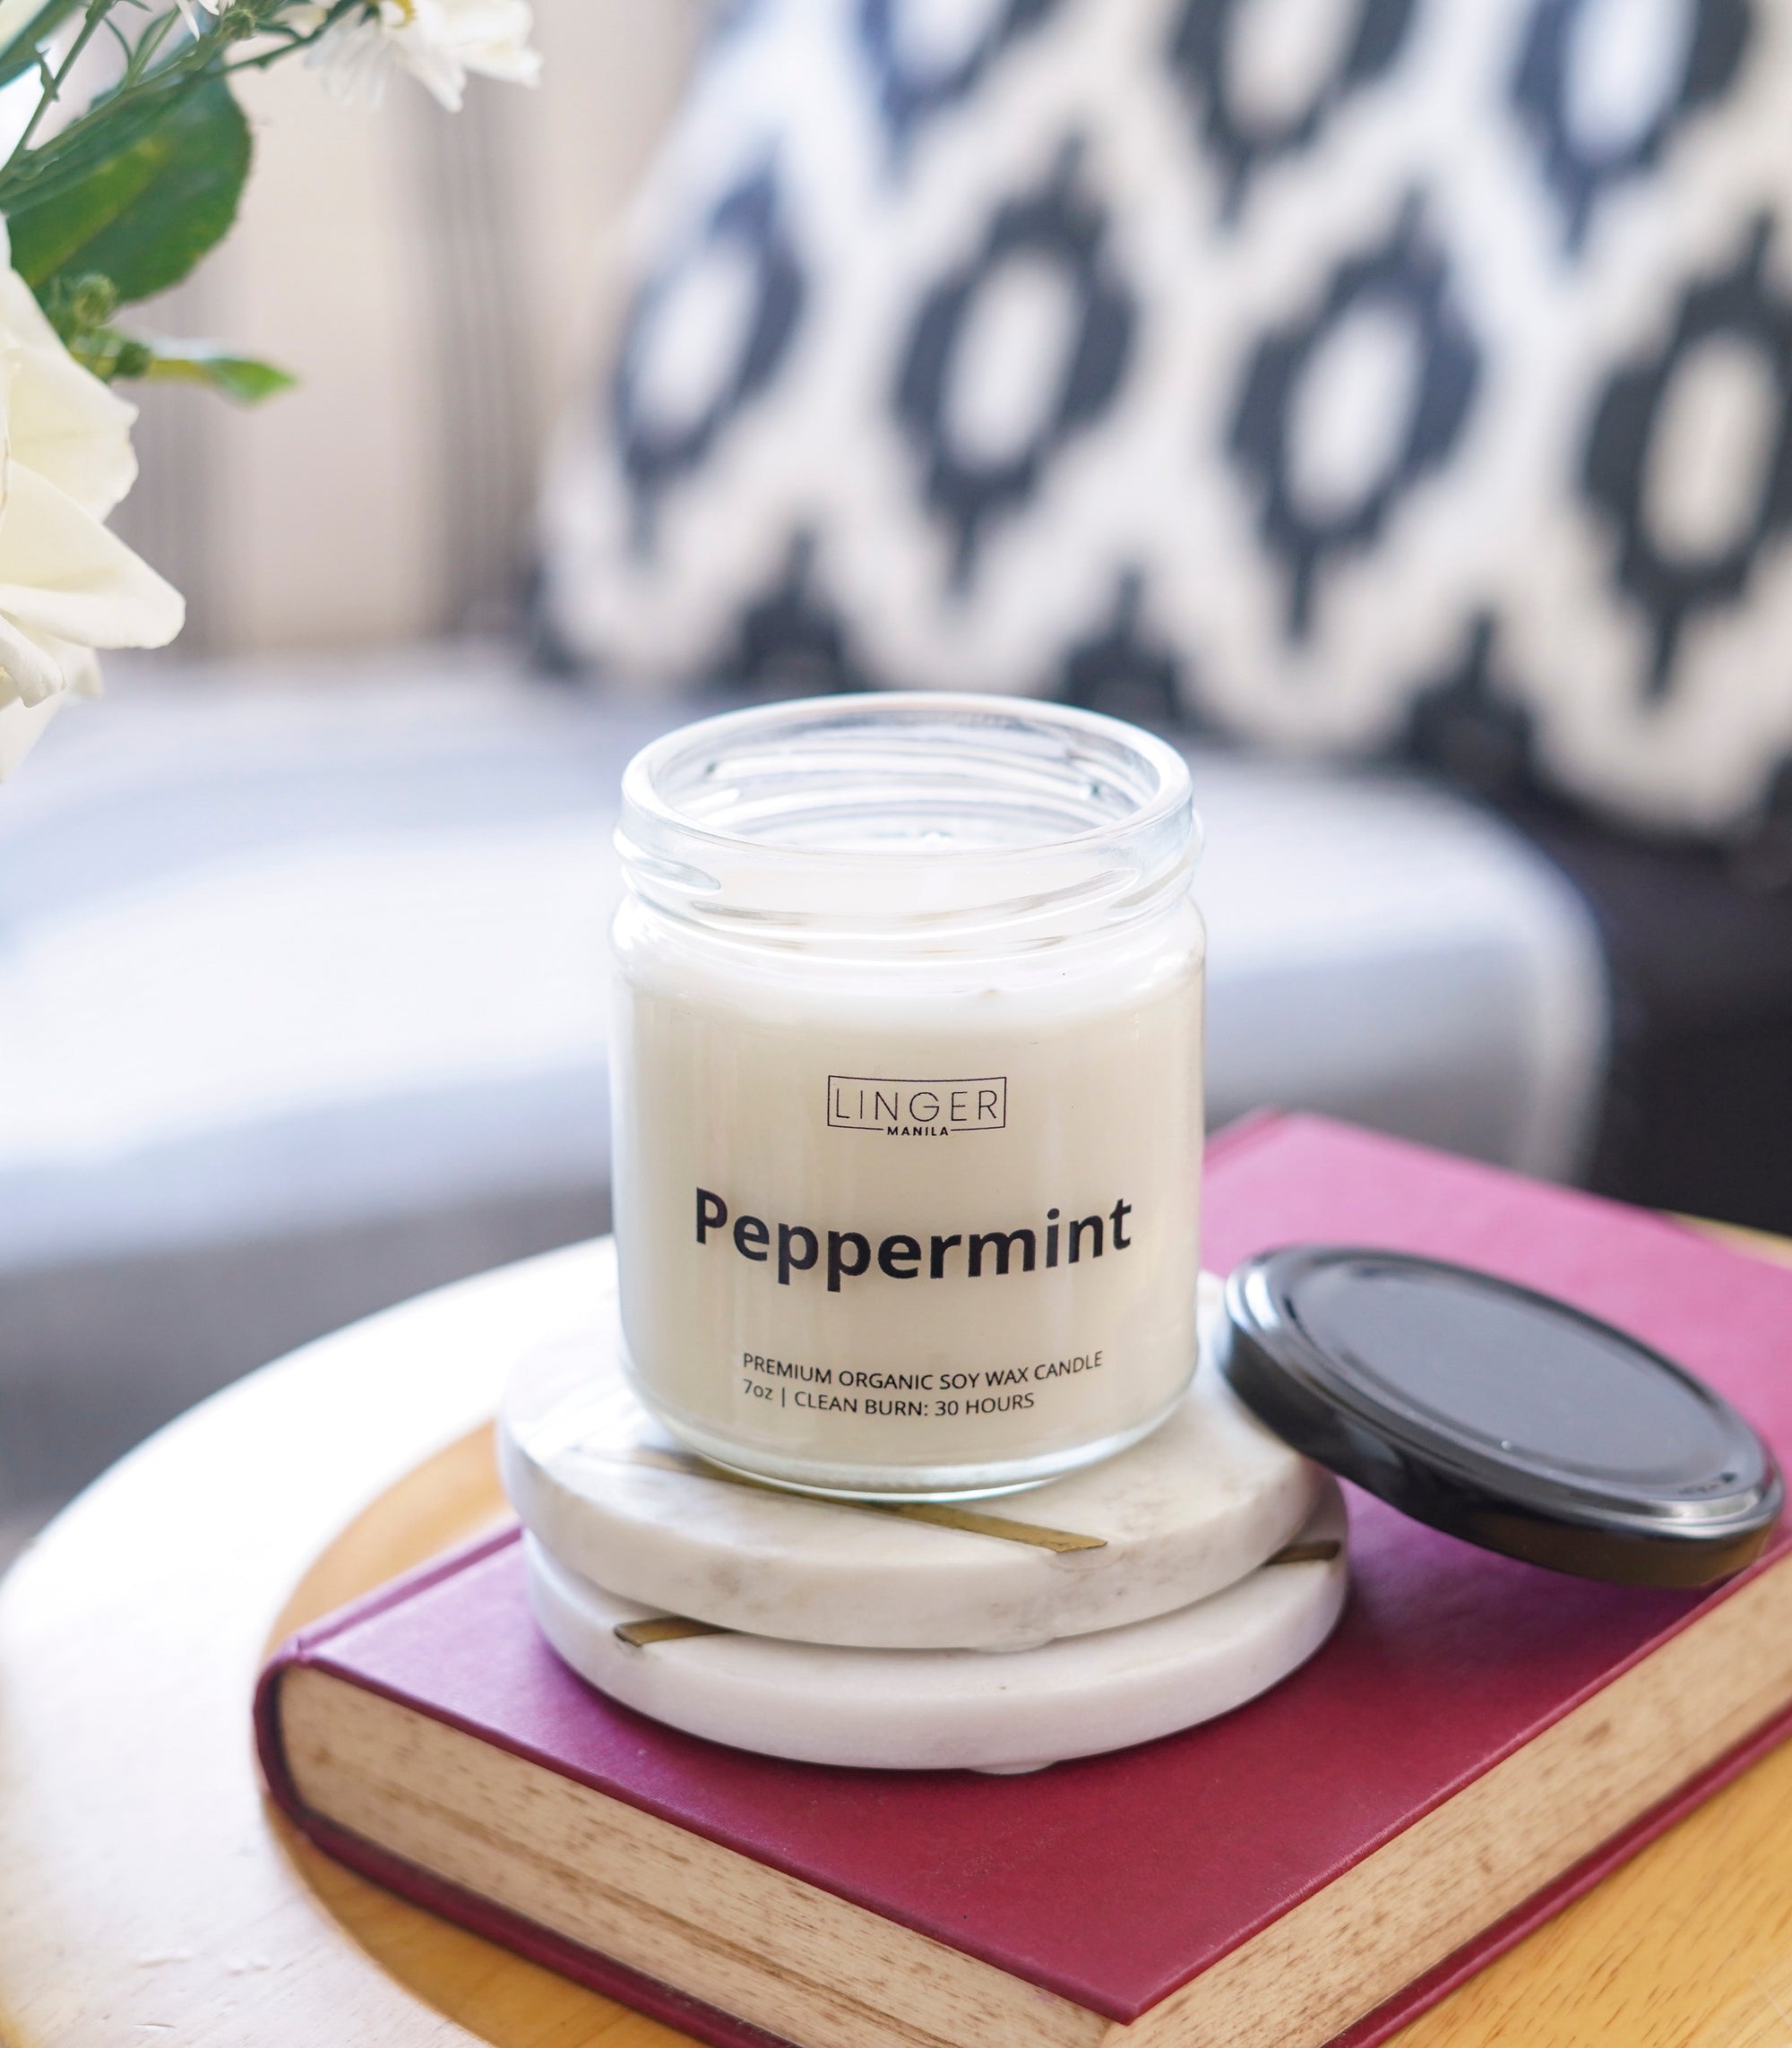 Linger Peppermint Candle